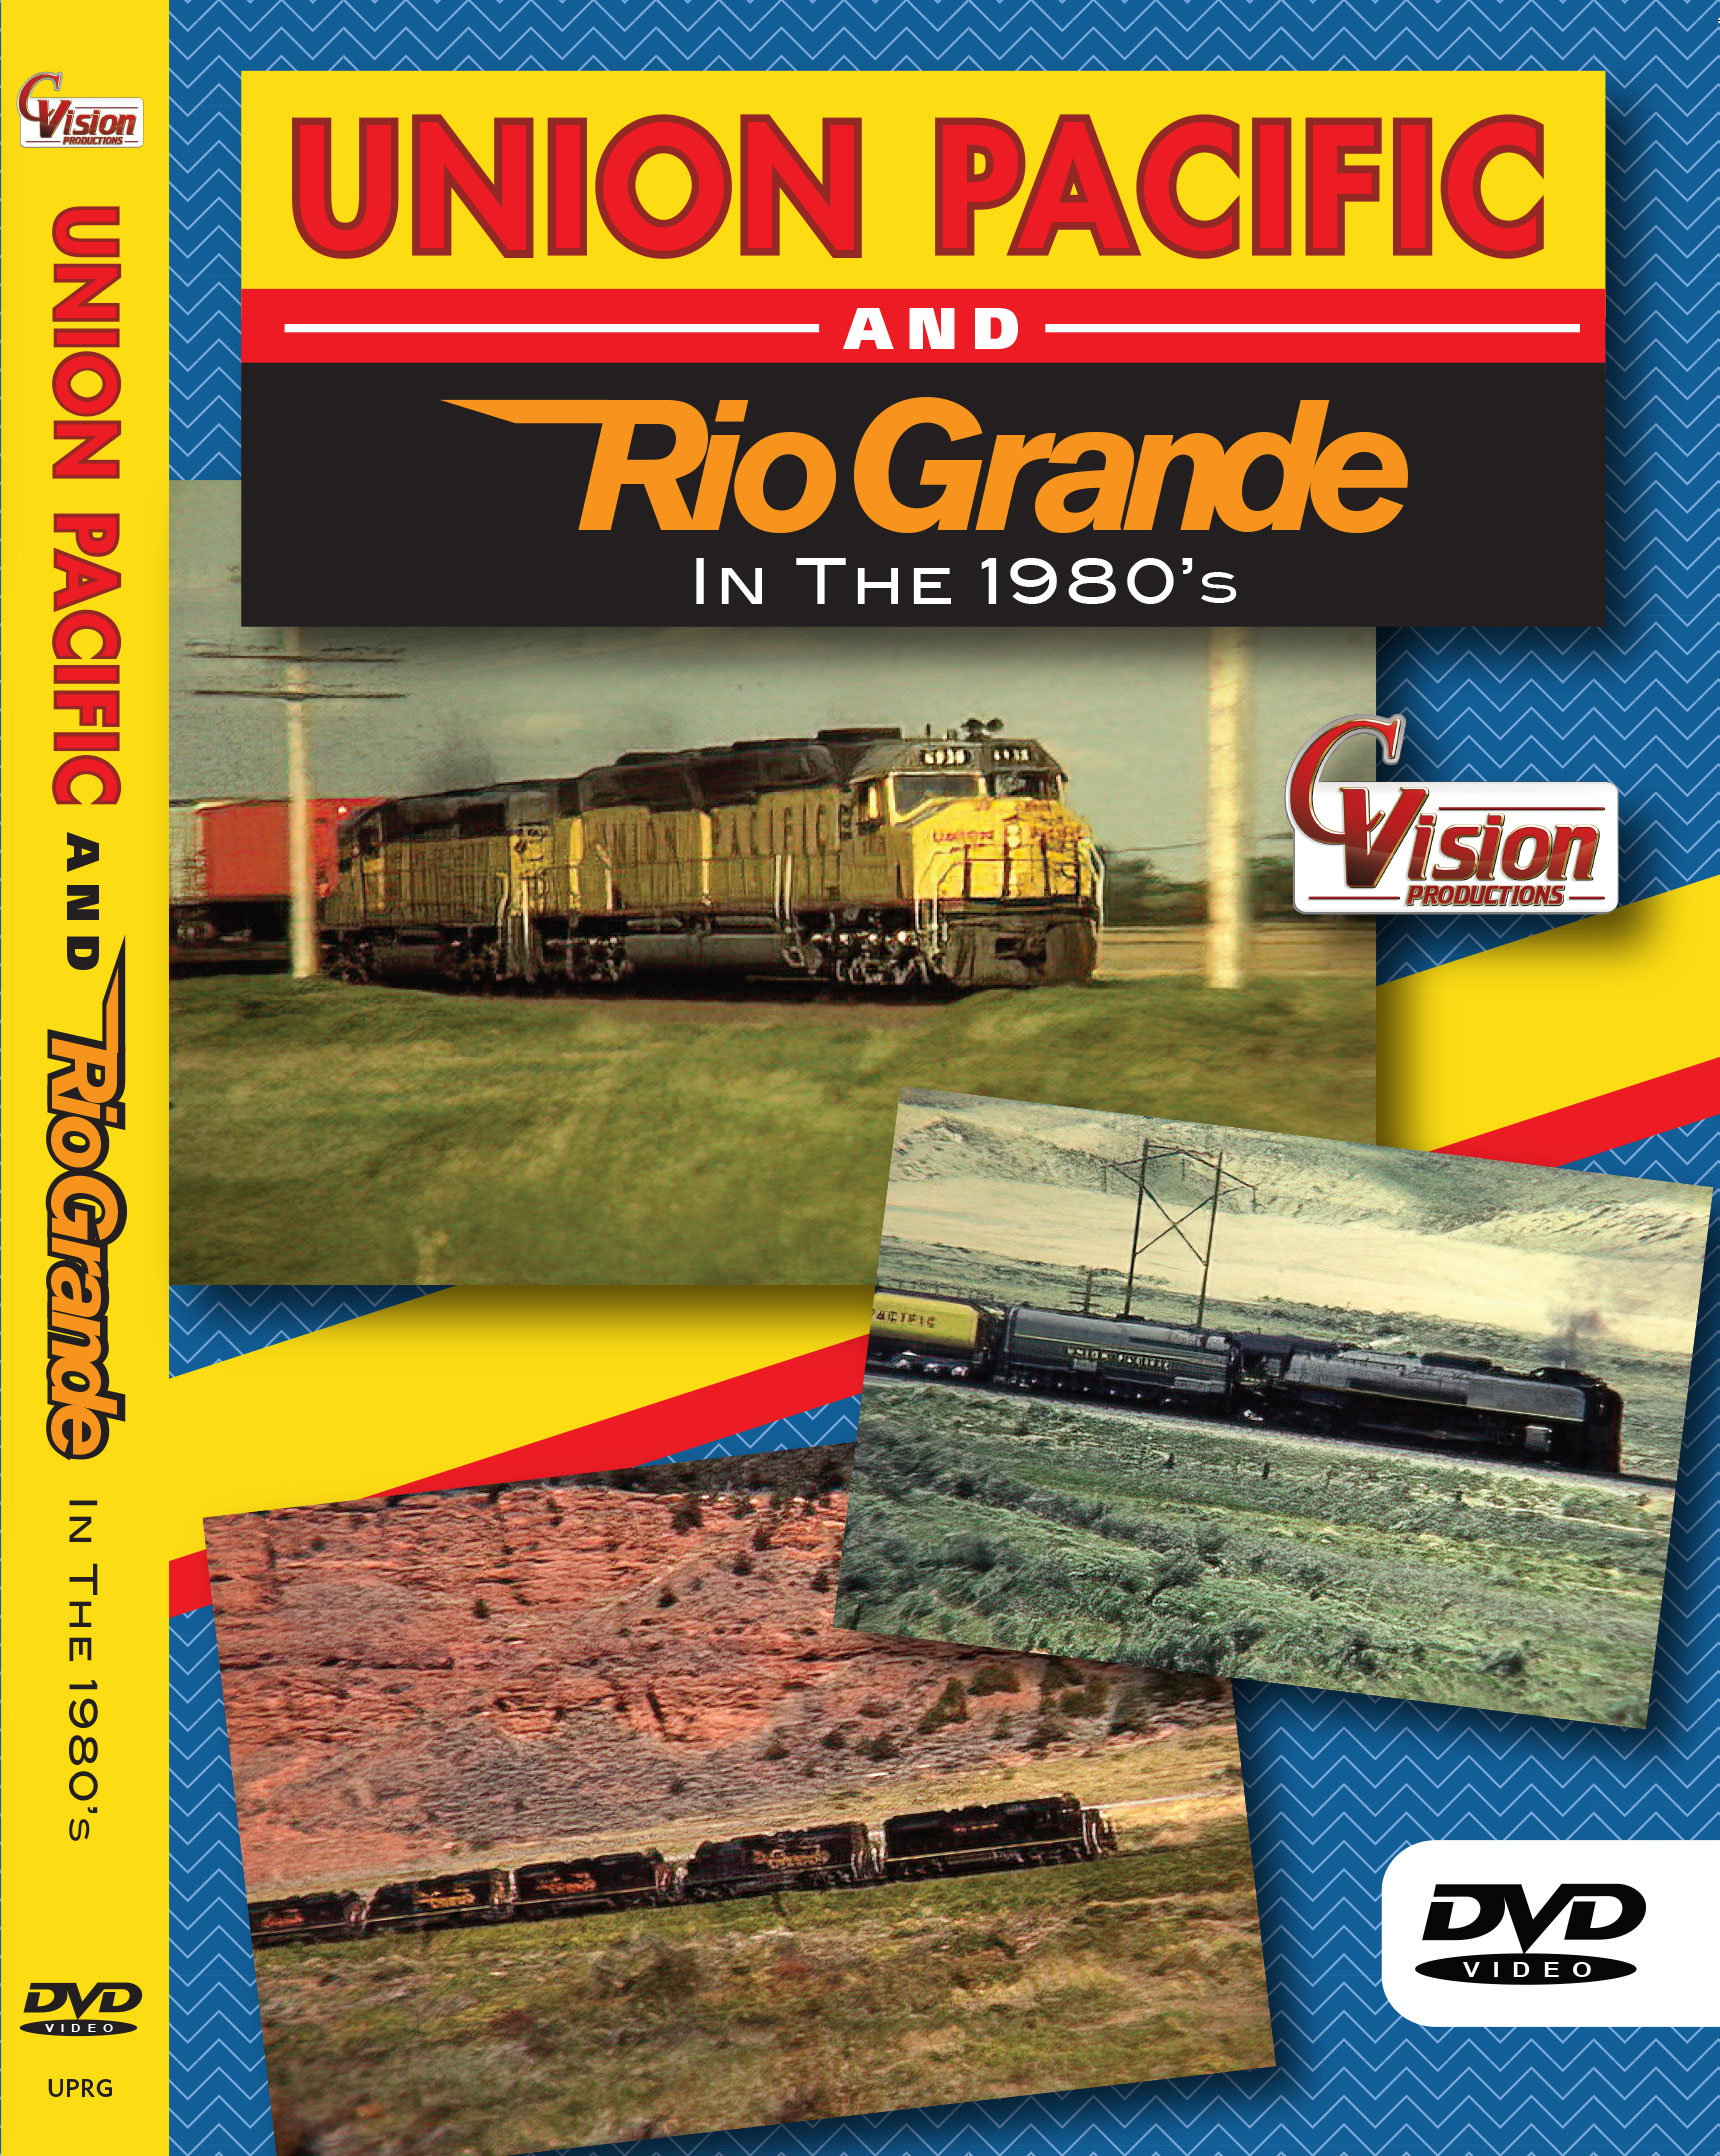 Union Pacific and Rio Grande in the 1980s DVD C Vision Productions UPRG